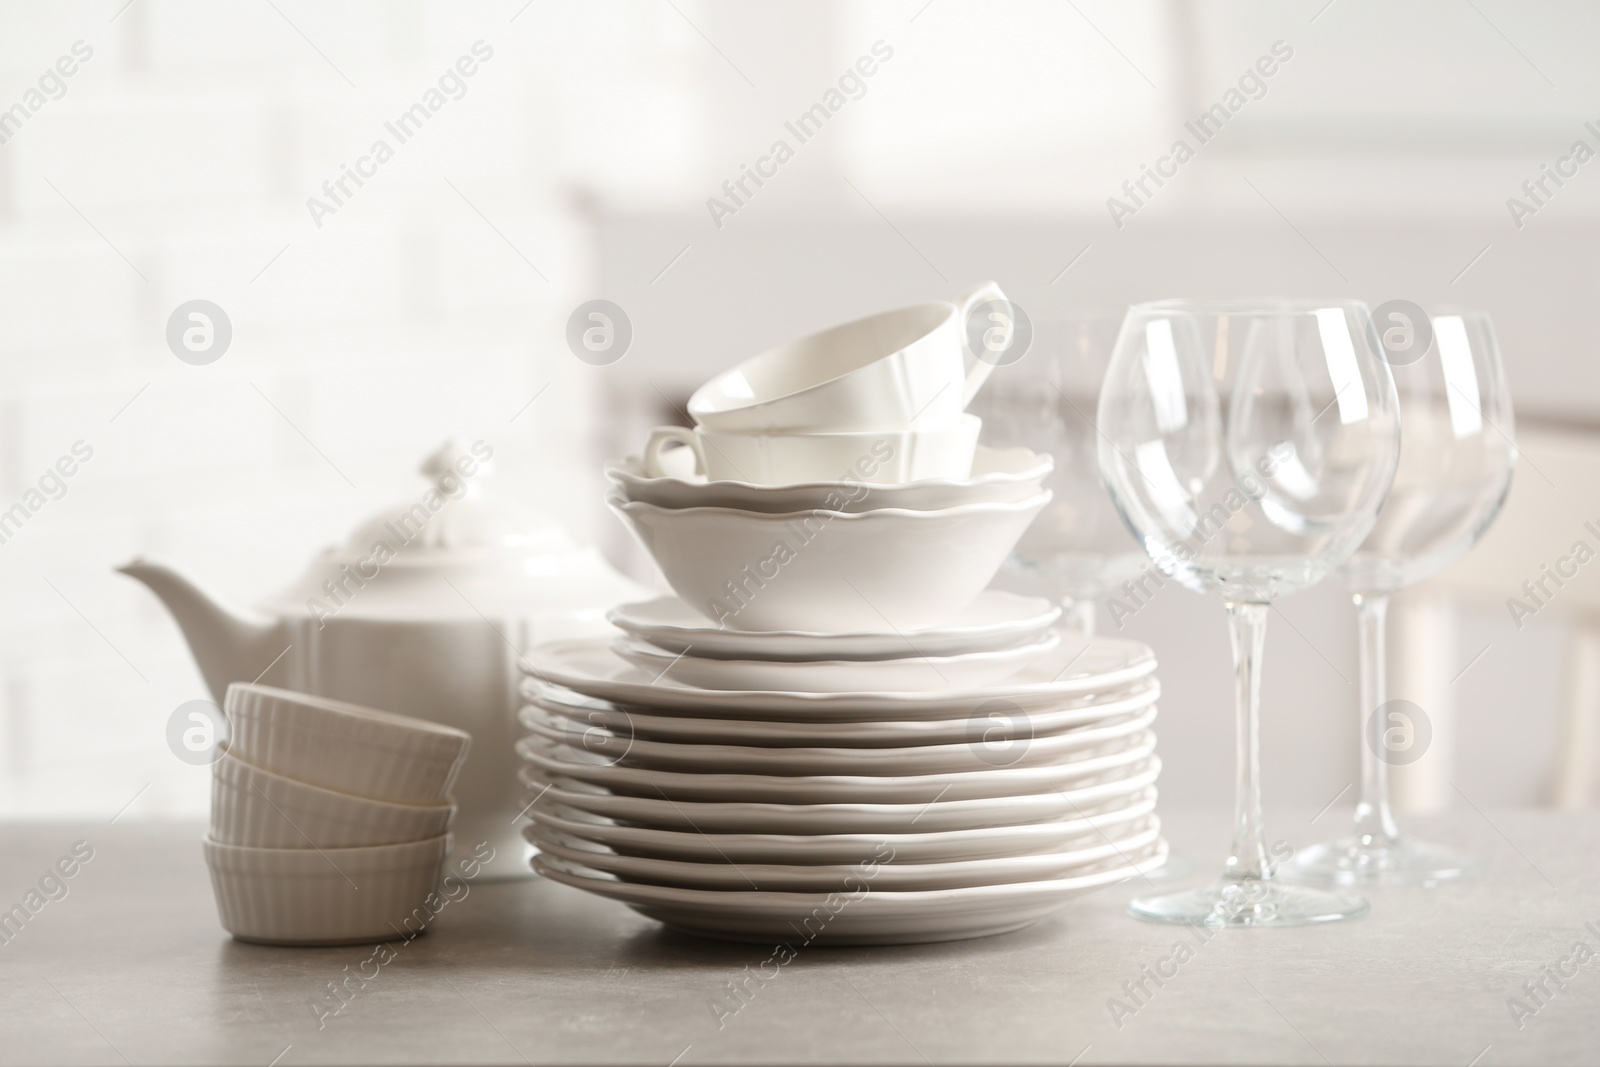 Photo of Set of clean dishes against blurred background